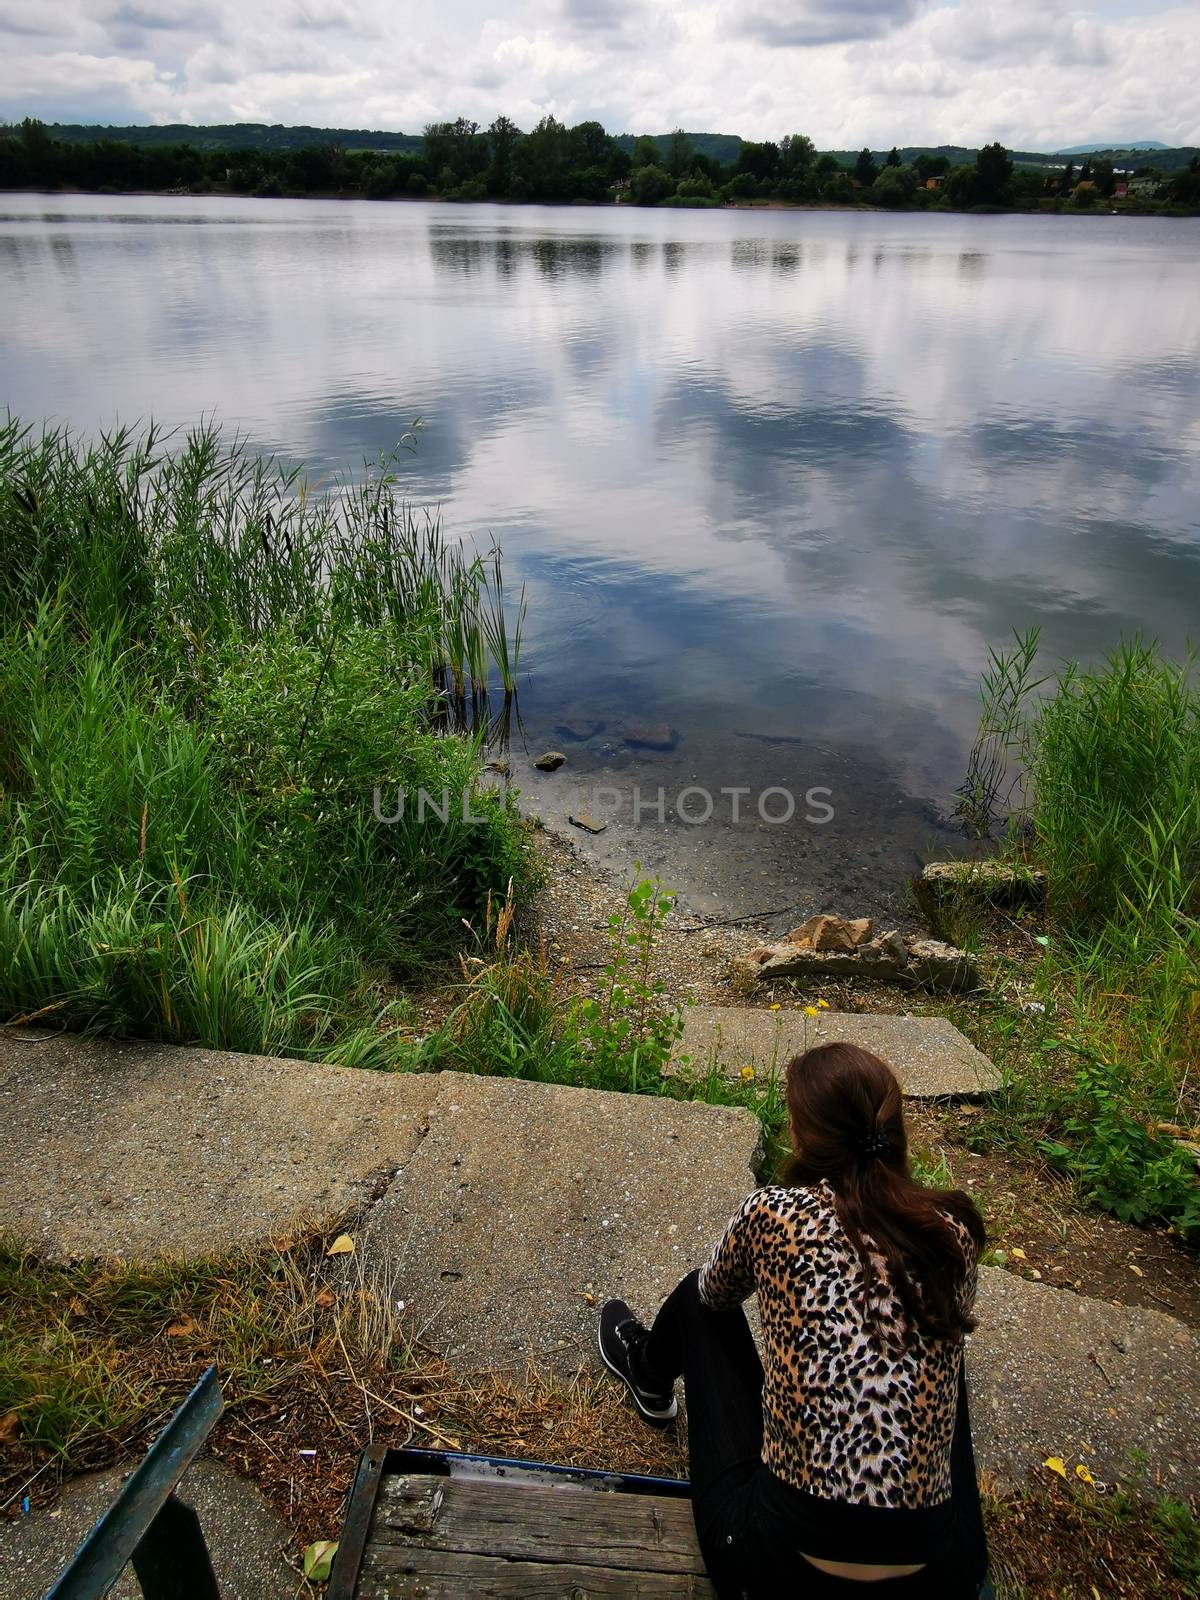 A woman standing in front of a body of water by balage941